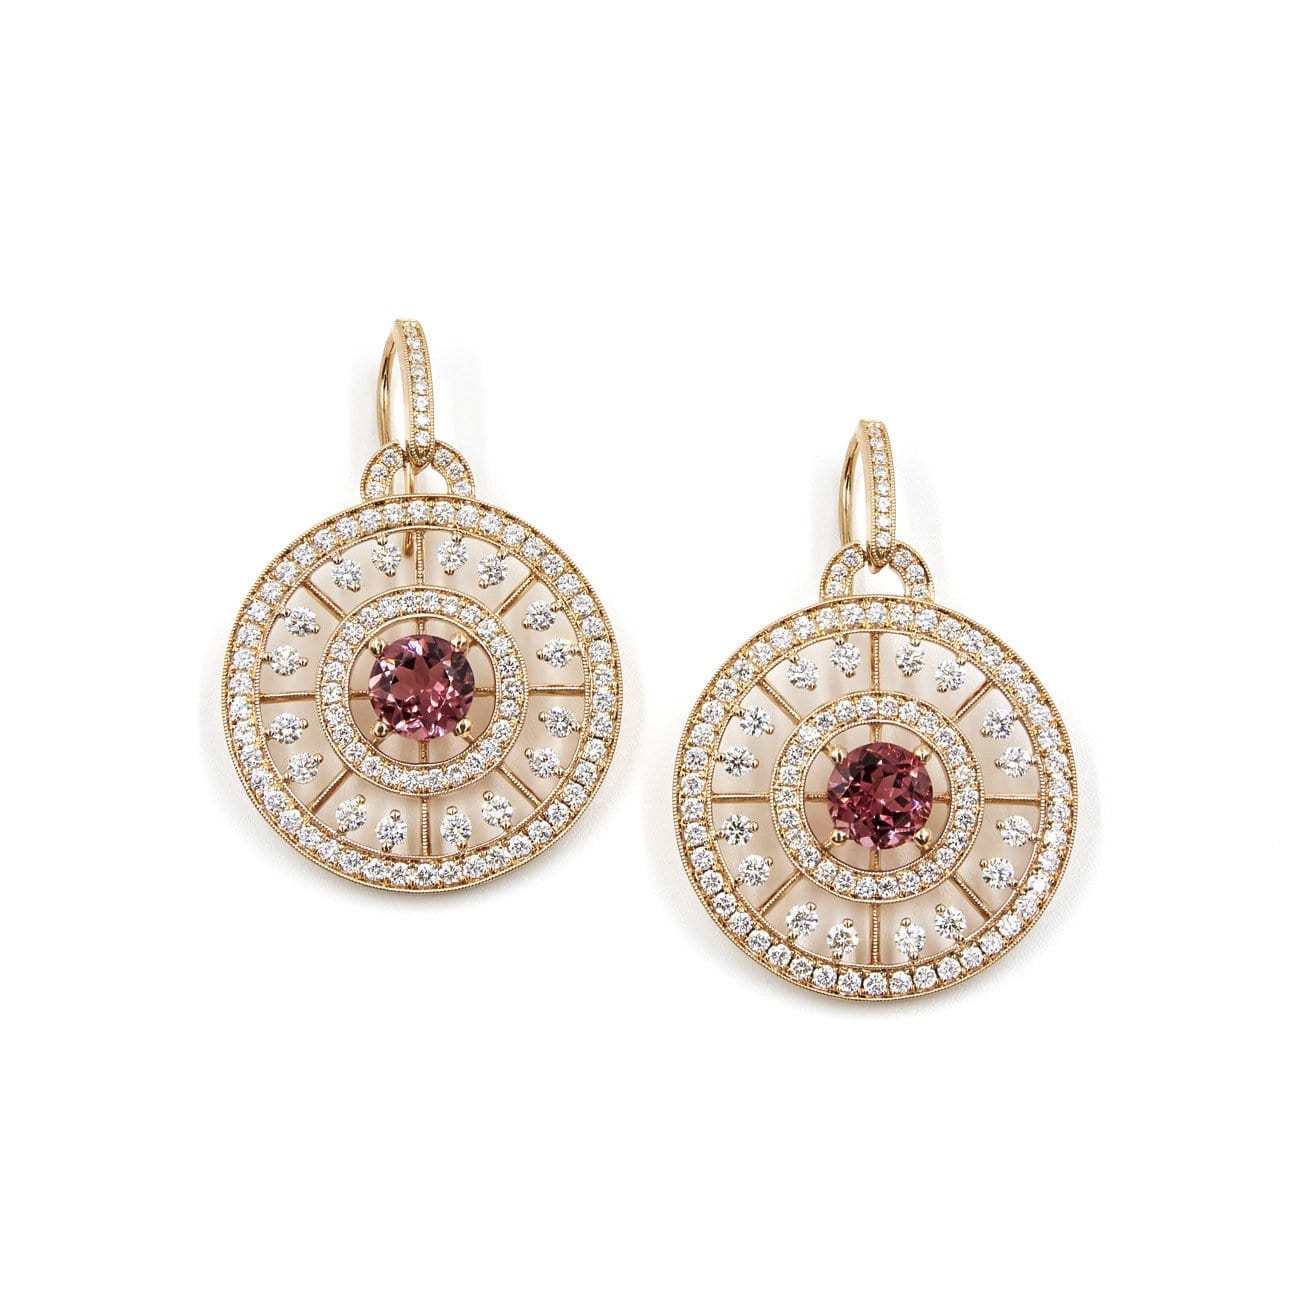 DIAMOND AND GEMSTONE EARRINGS - DUCHESS - Chris Aire Fine Jewelry & Timepieces